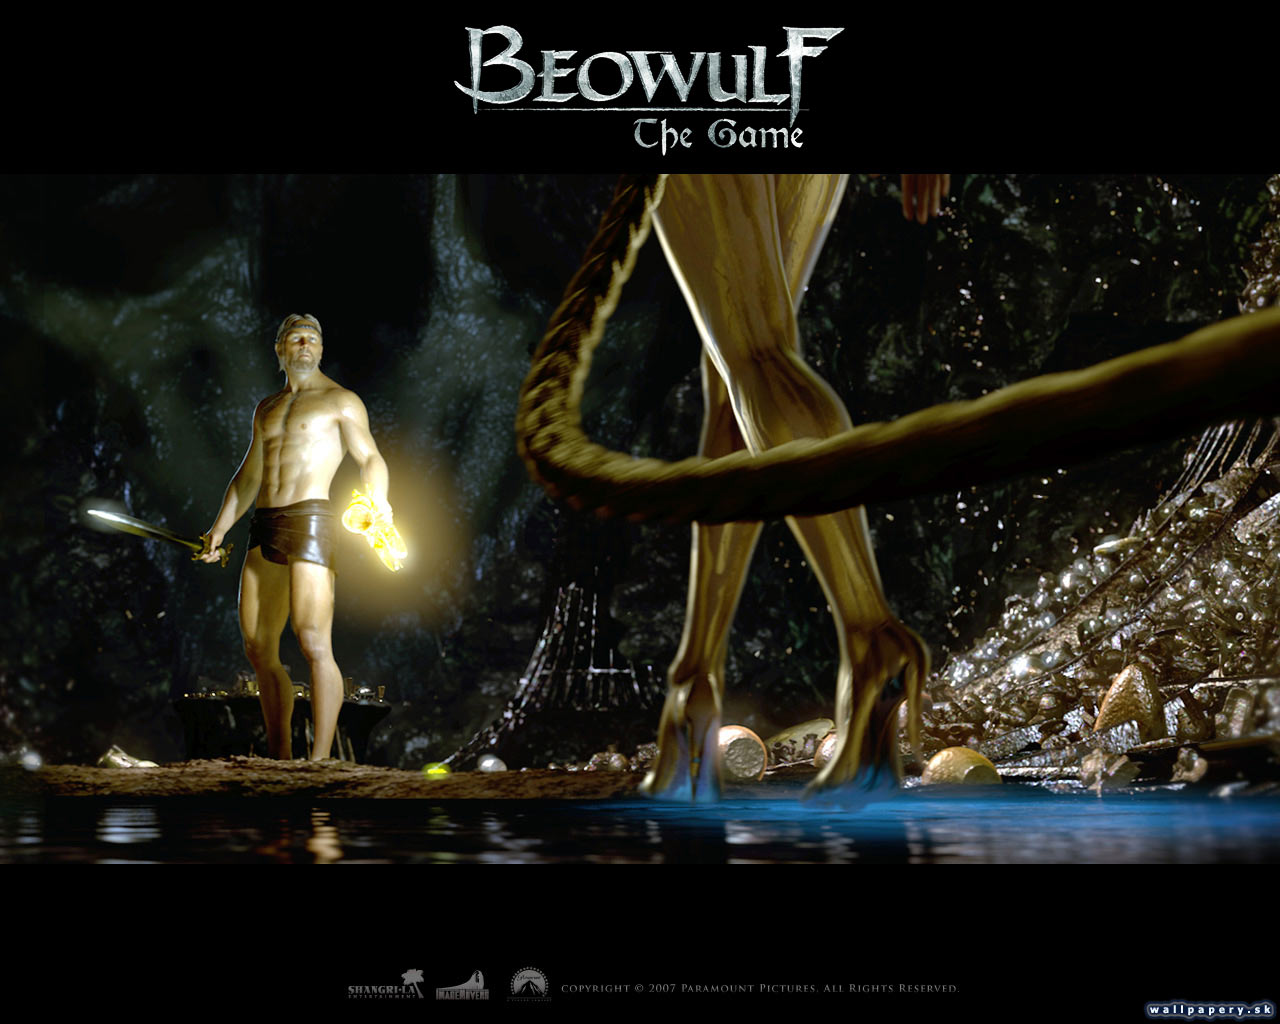 Beowulf: The Game - wallpaper 9